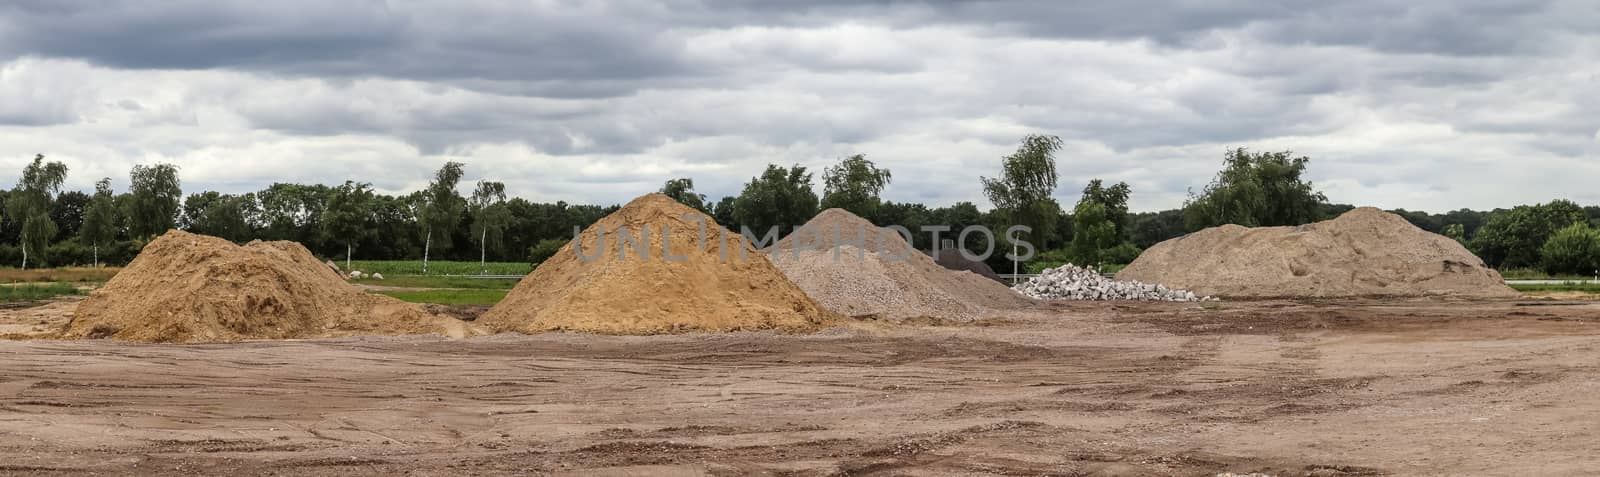 View into a gravel pit with piles of sand and some tire tracks by MP_foto71